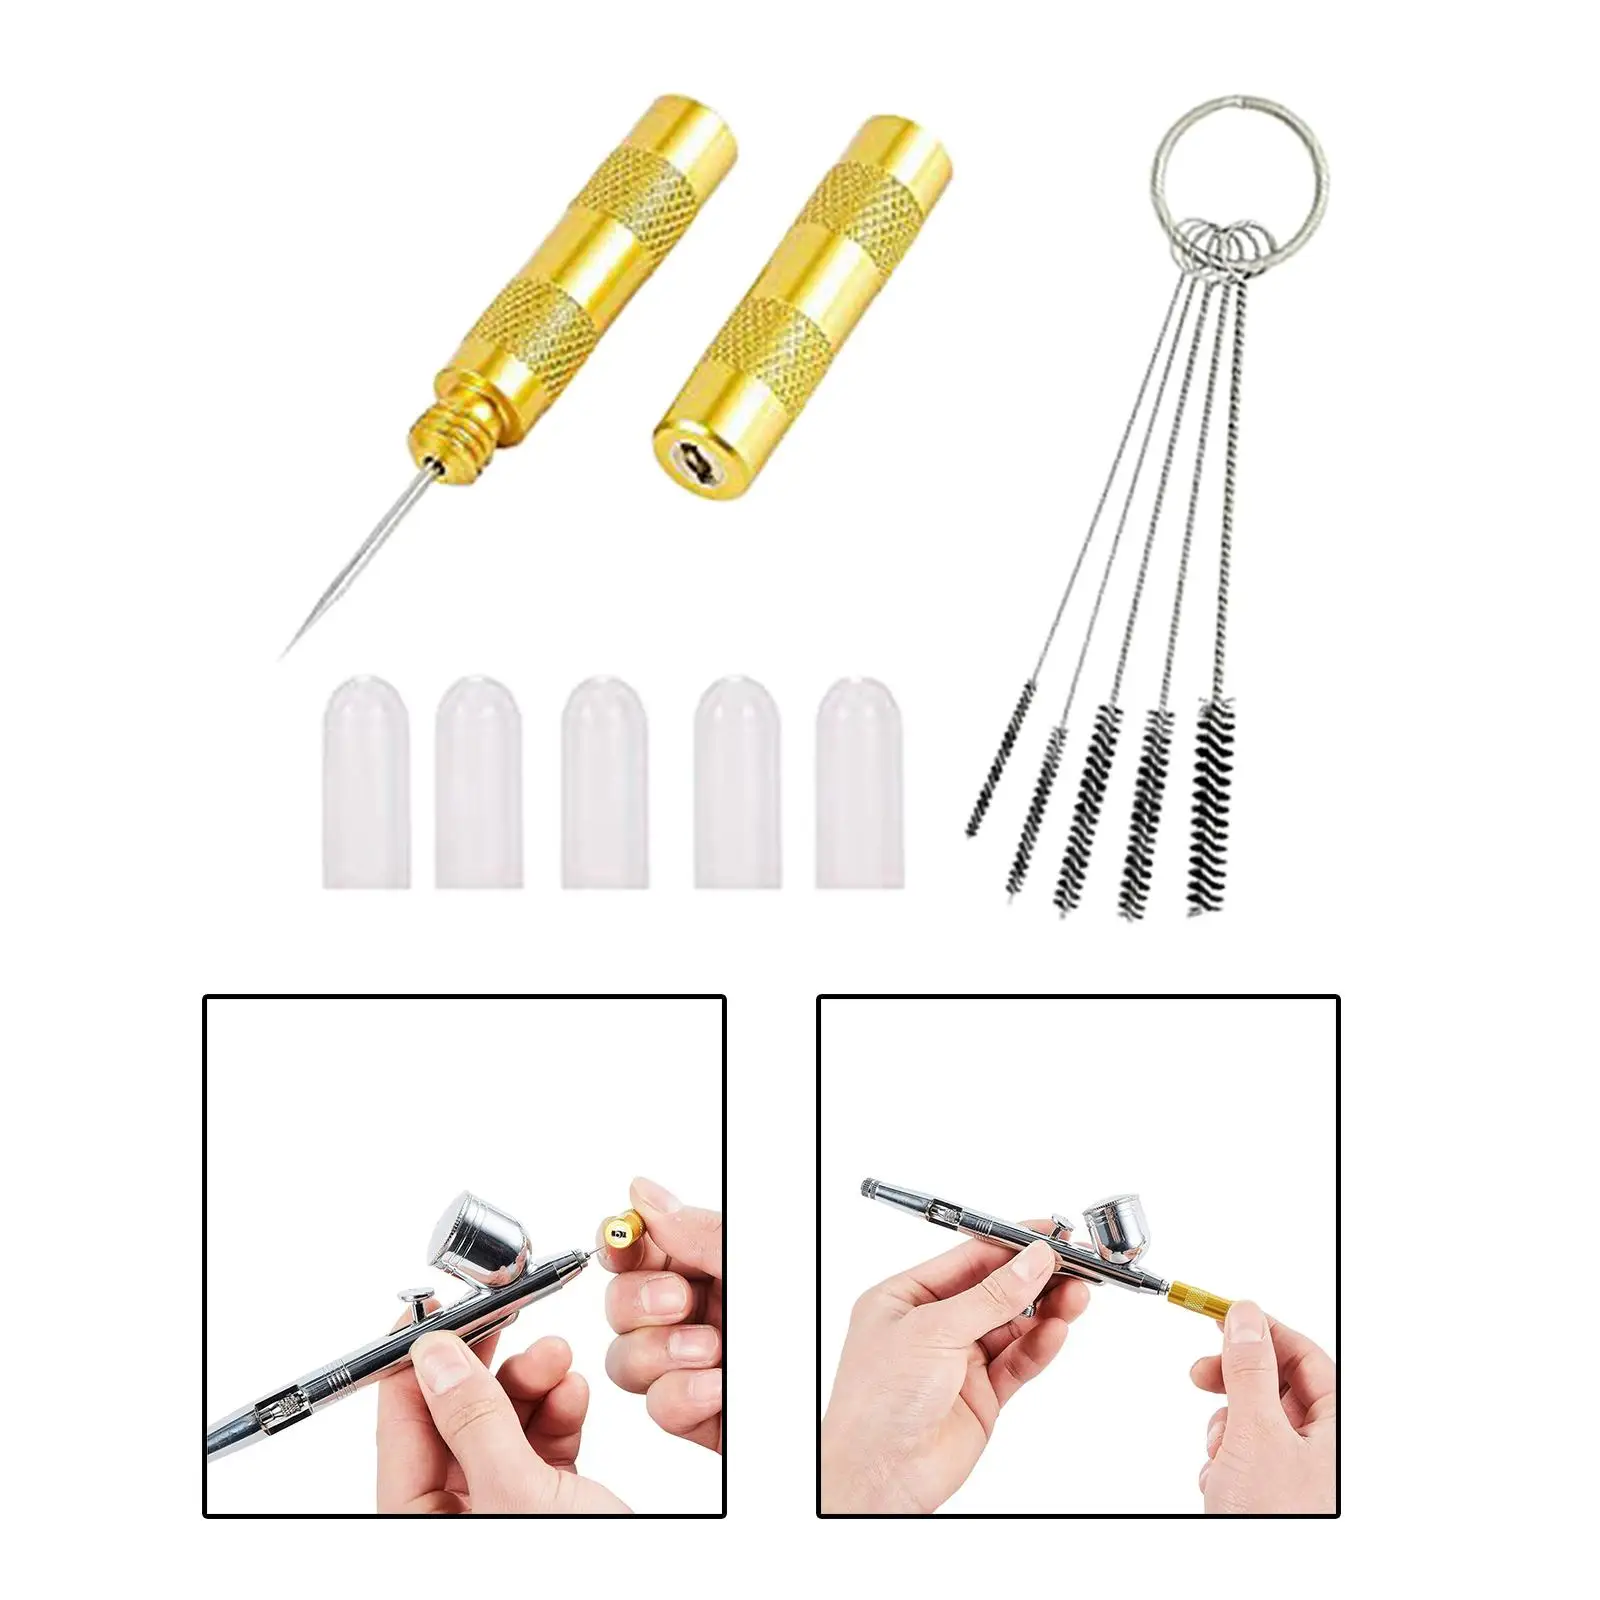 Airbrush Cleaning Repairing Set Easy to Use Airbrush Painting Supplies Professional Cleaner Portable Spray Gun Painting Supplies